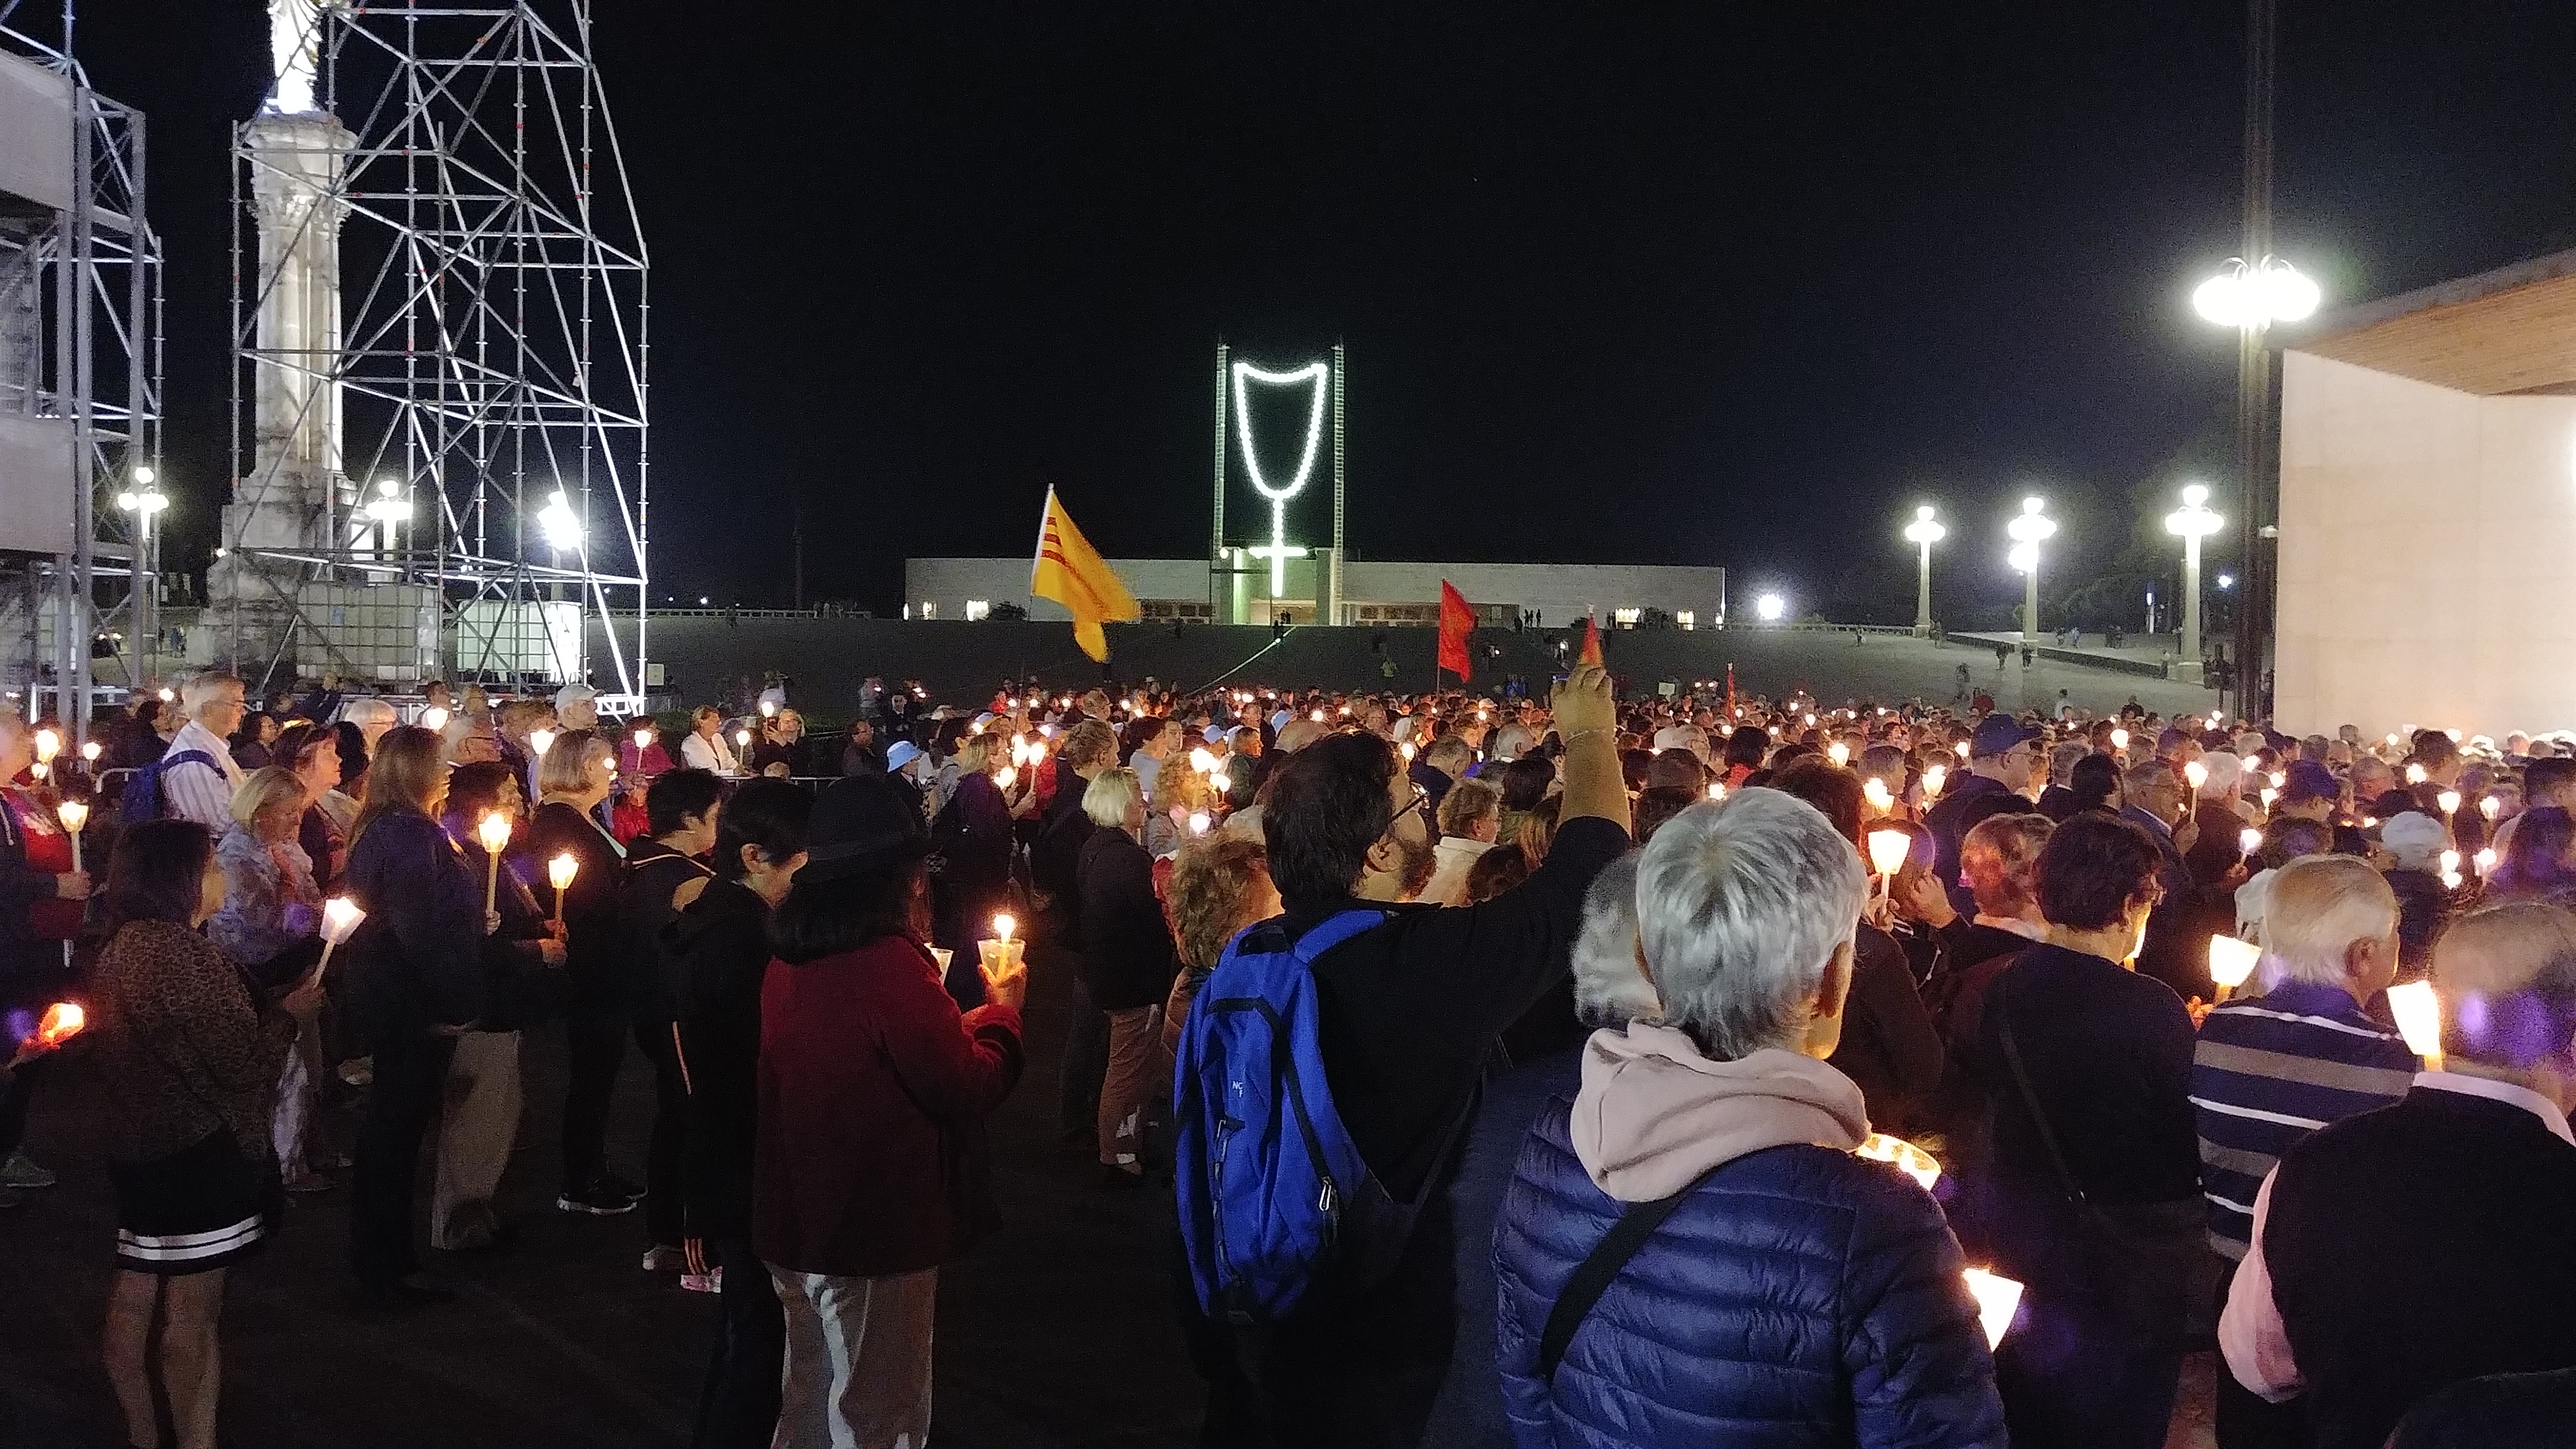 The faithful throughout the world descend nightly in Fatima for the procession. (CT Photo/Greg Hartman)